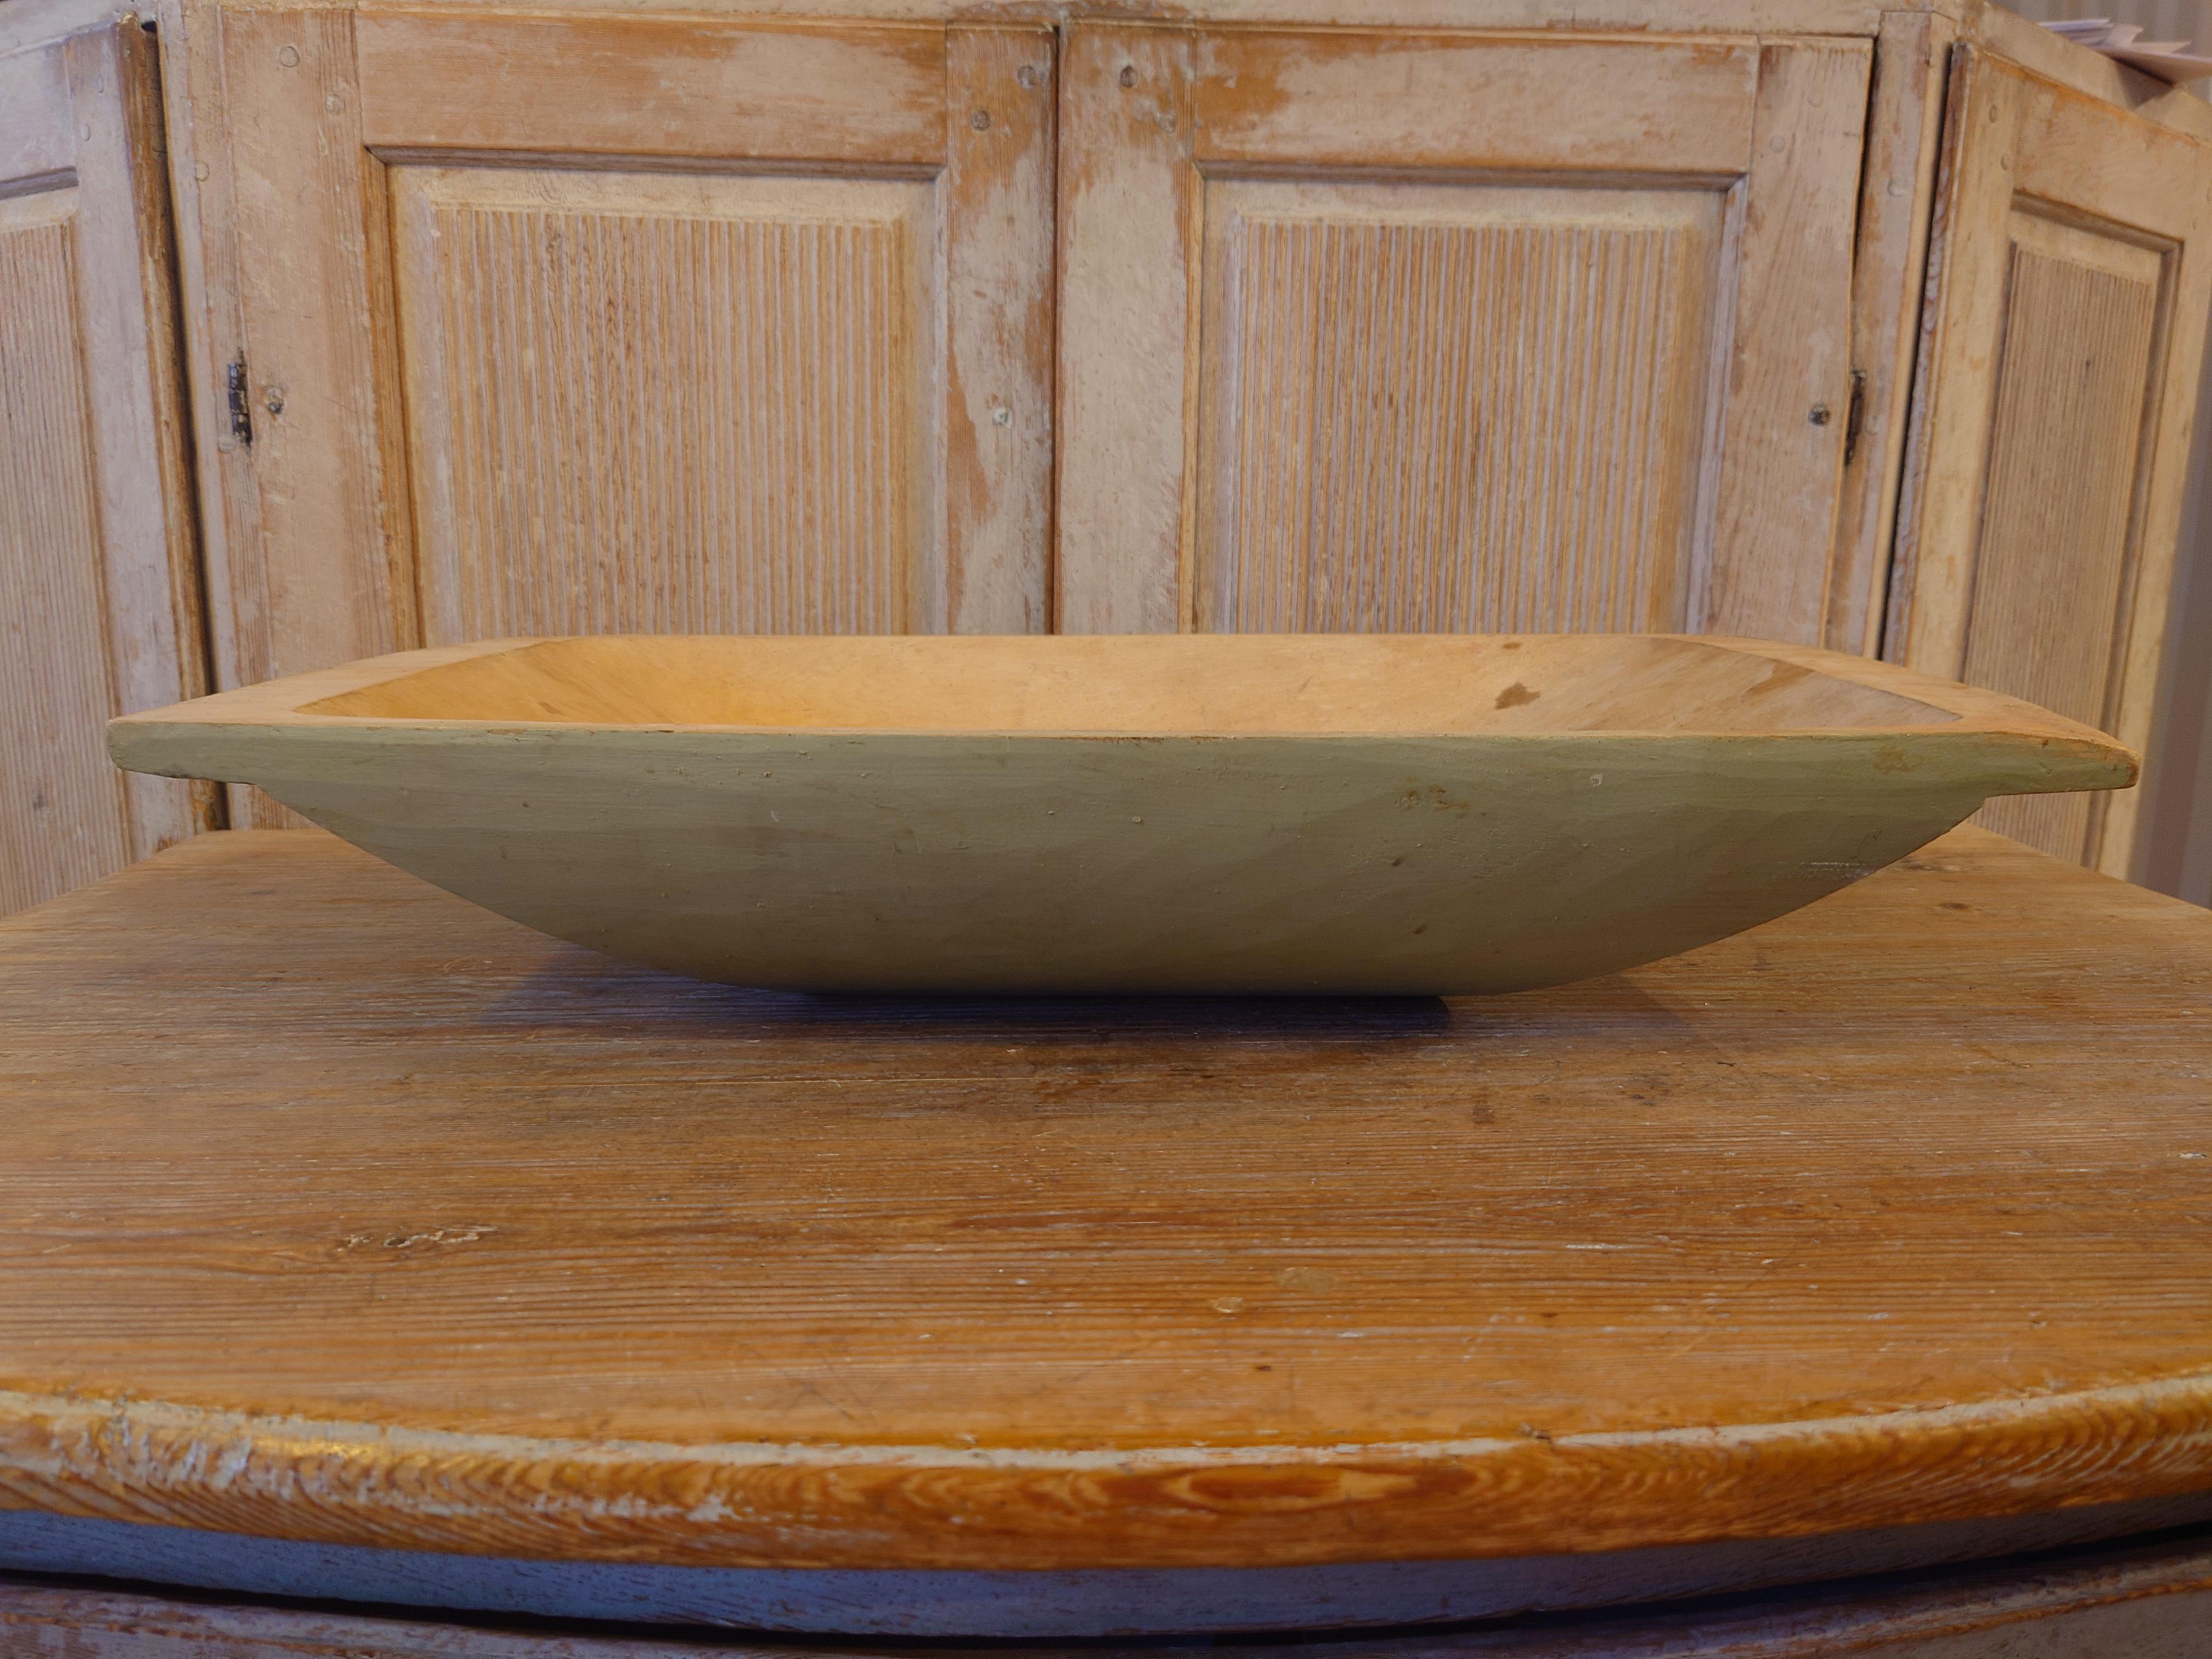 19th Century Swedish Antique wooden tray / serving bowl with untouched Original Paint from Skellefteå Västerbotten, Northern Sweden.
A large farmers handcrafted Trough or Serving bowl or Centerpiece.
A highly recommend functional object with